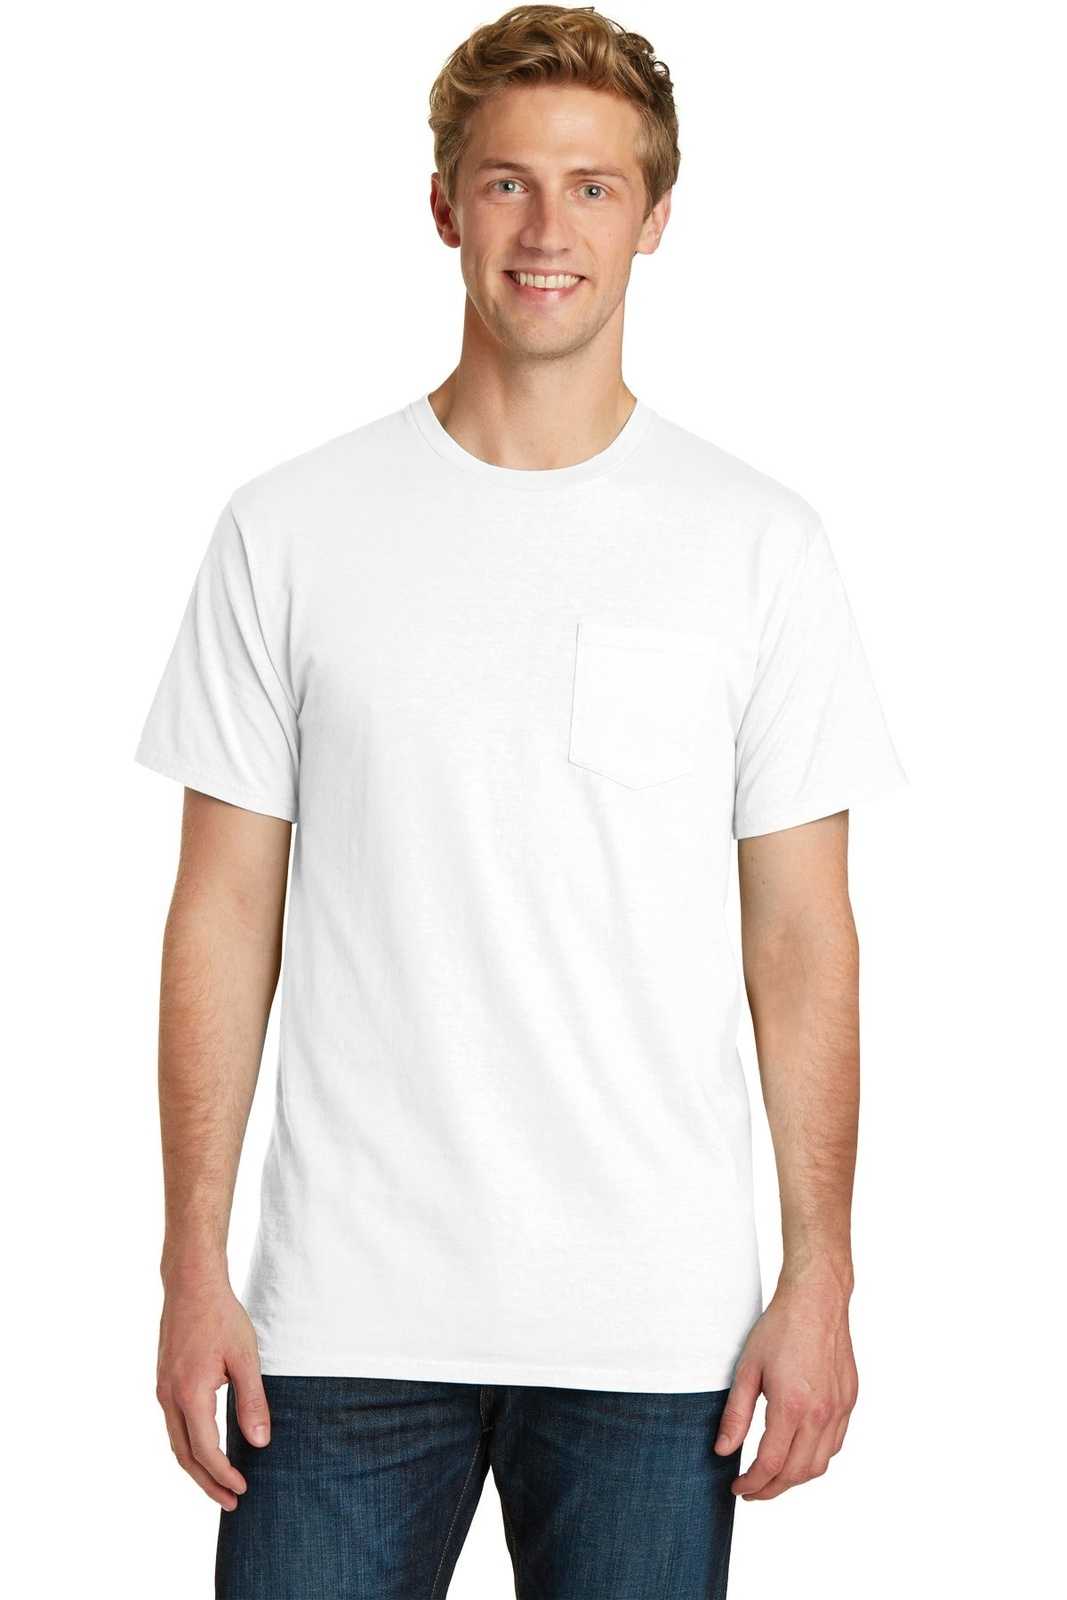 Port & Company PC099P Beach Wash Garment-Dyed Pocket Tee - White - HIT a Double - 1